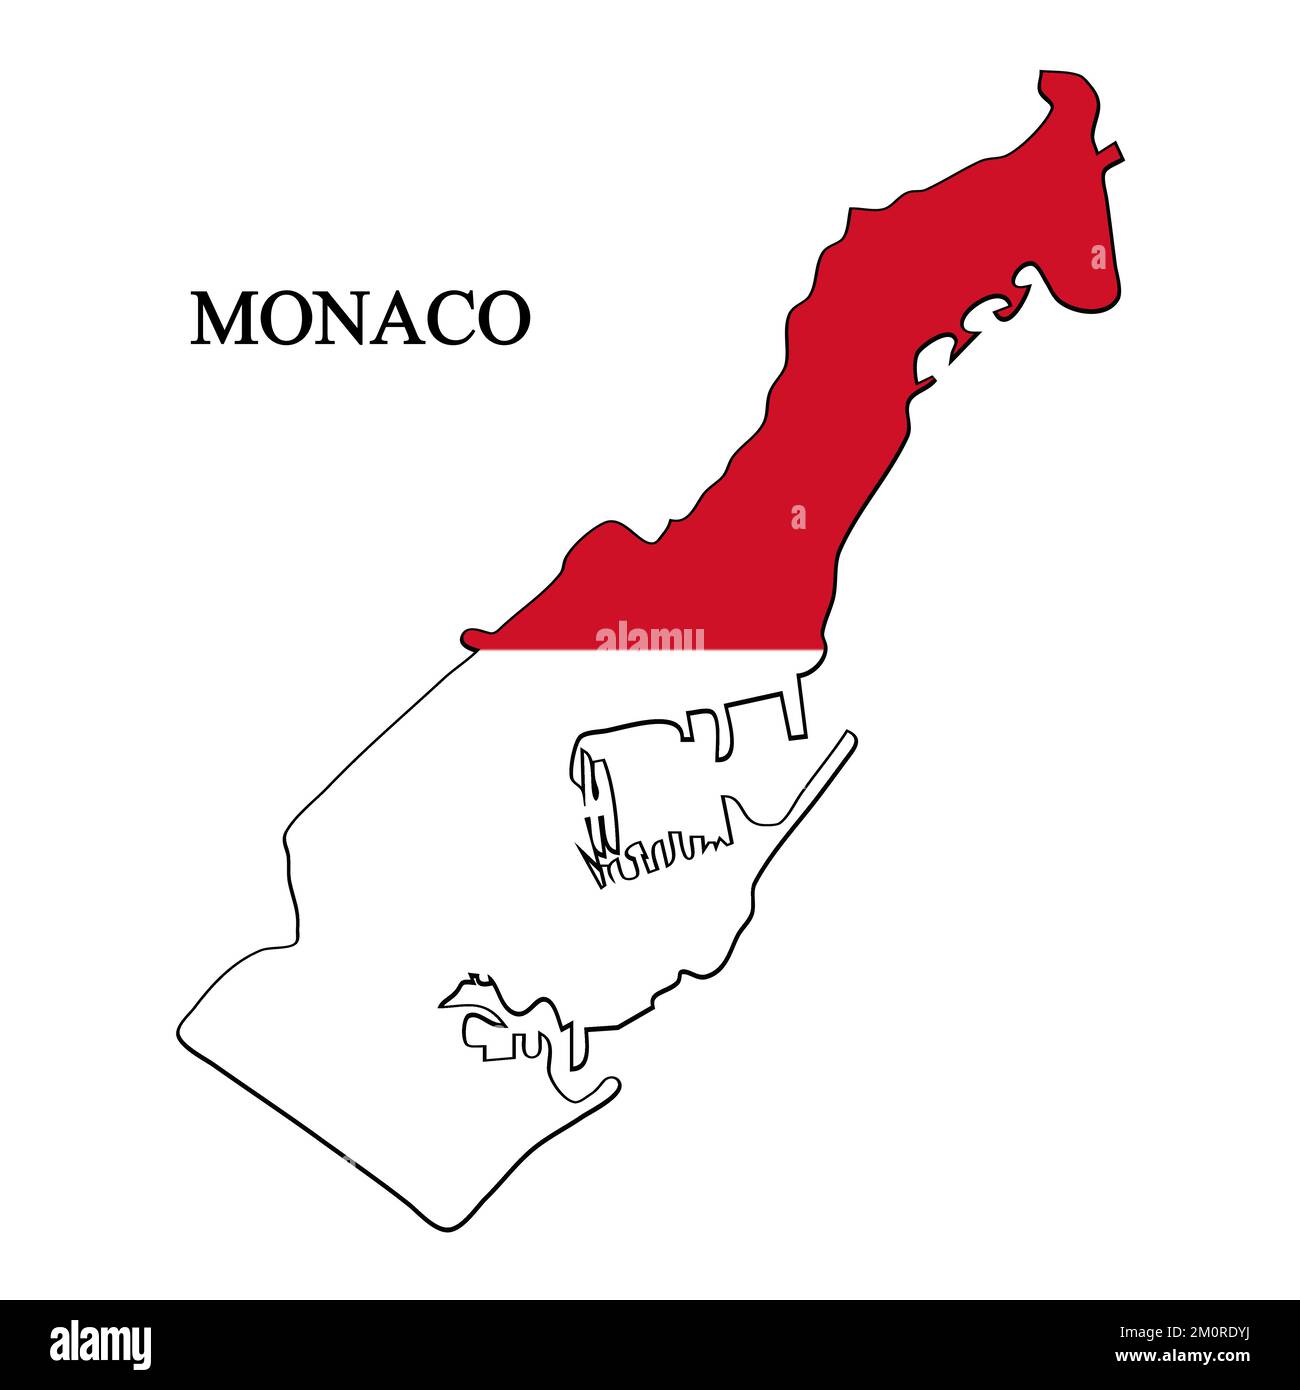 Monaco map vector illustration. Global economy. Famous country. Western Europe. Europe. Stock Vector